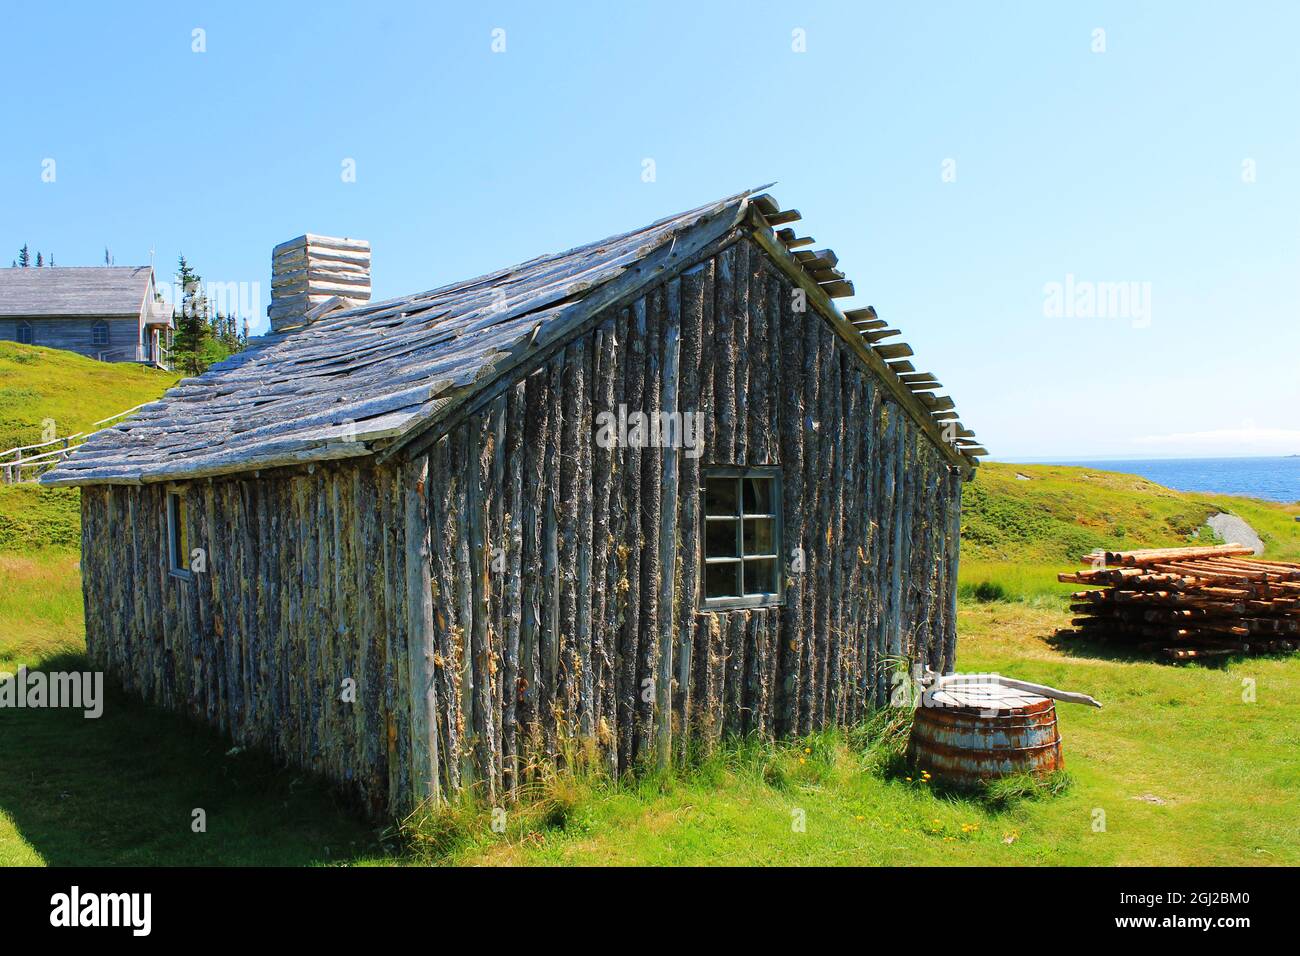 An old log house, with an old wooden church on a hill in the background, Random Passage Site, New Bonaventure, Newfoundland. Stock Photo